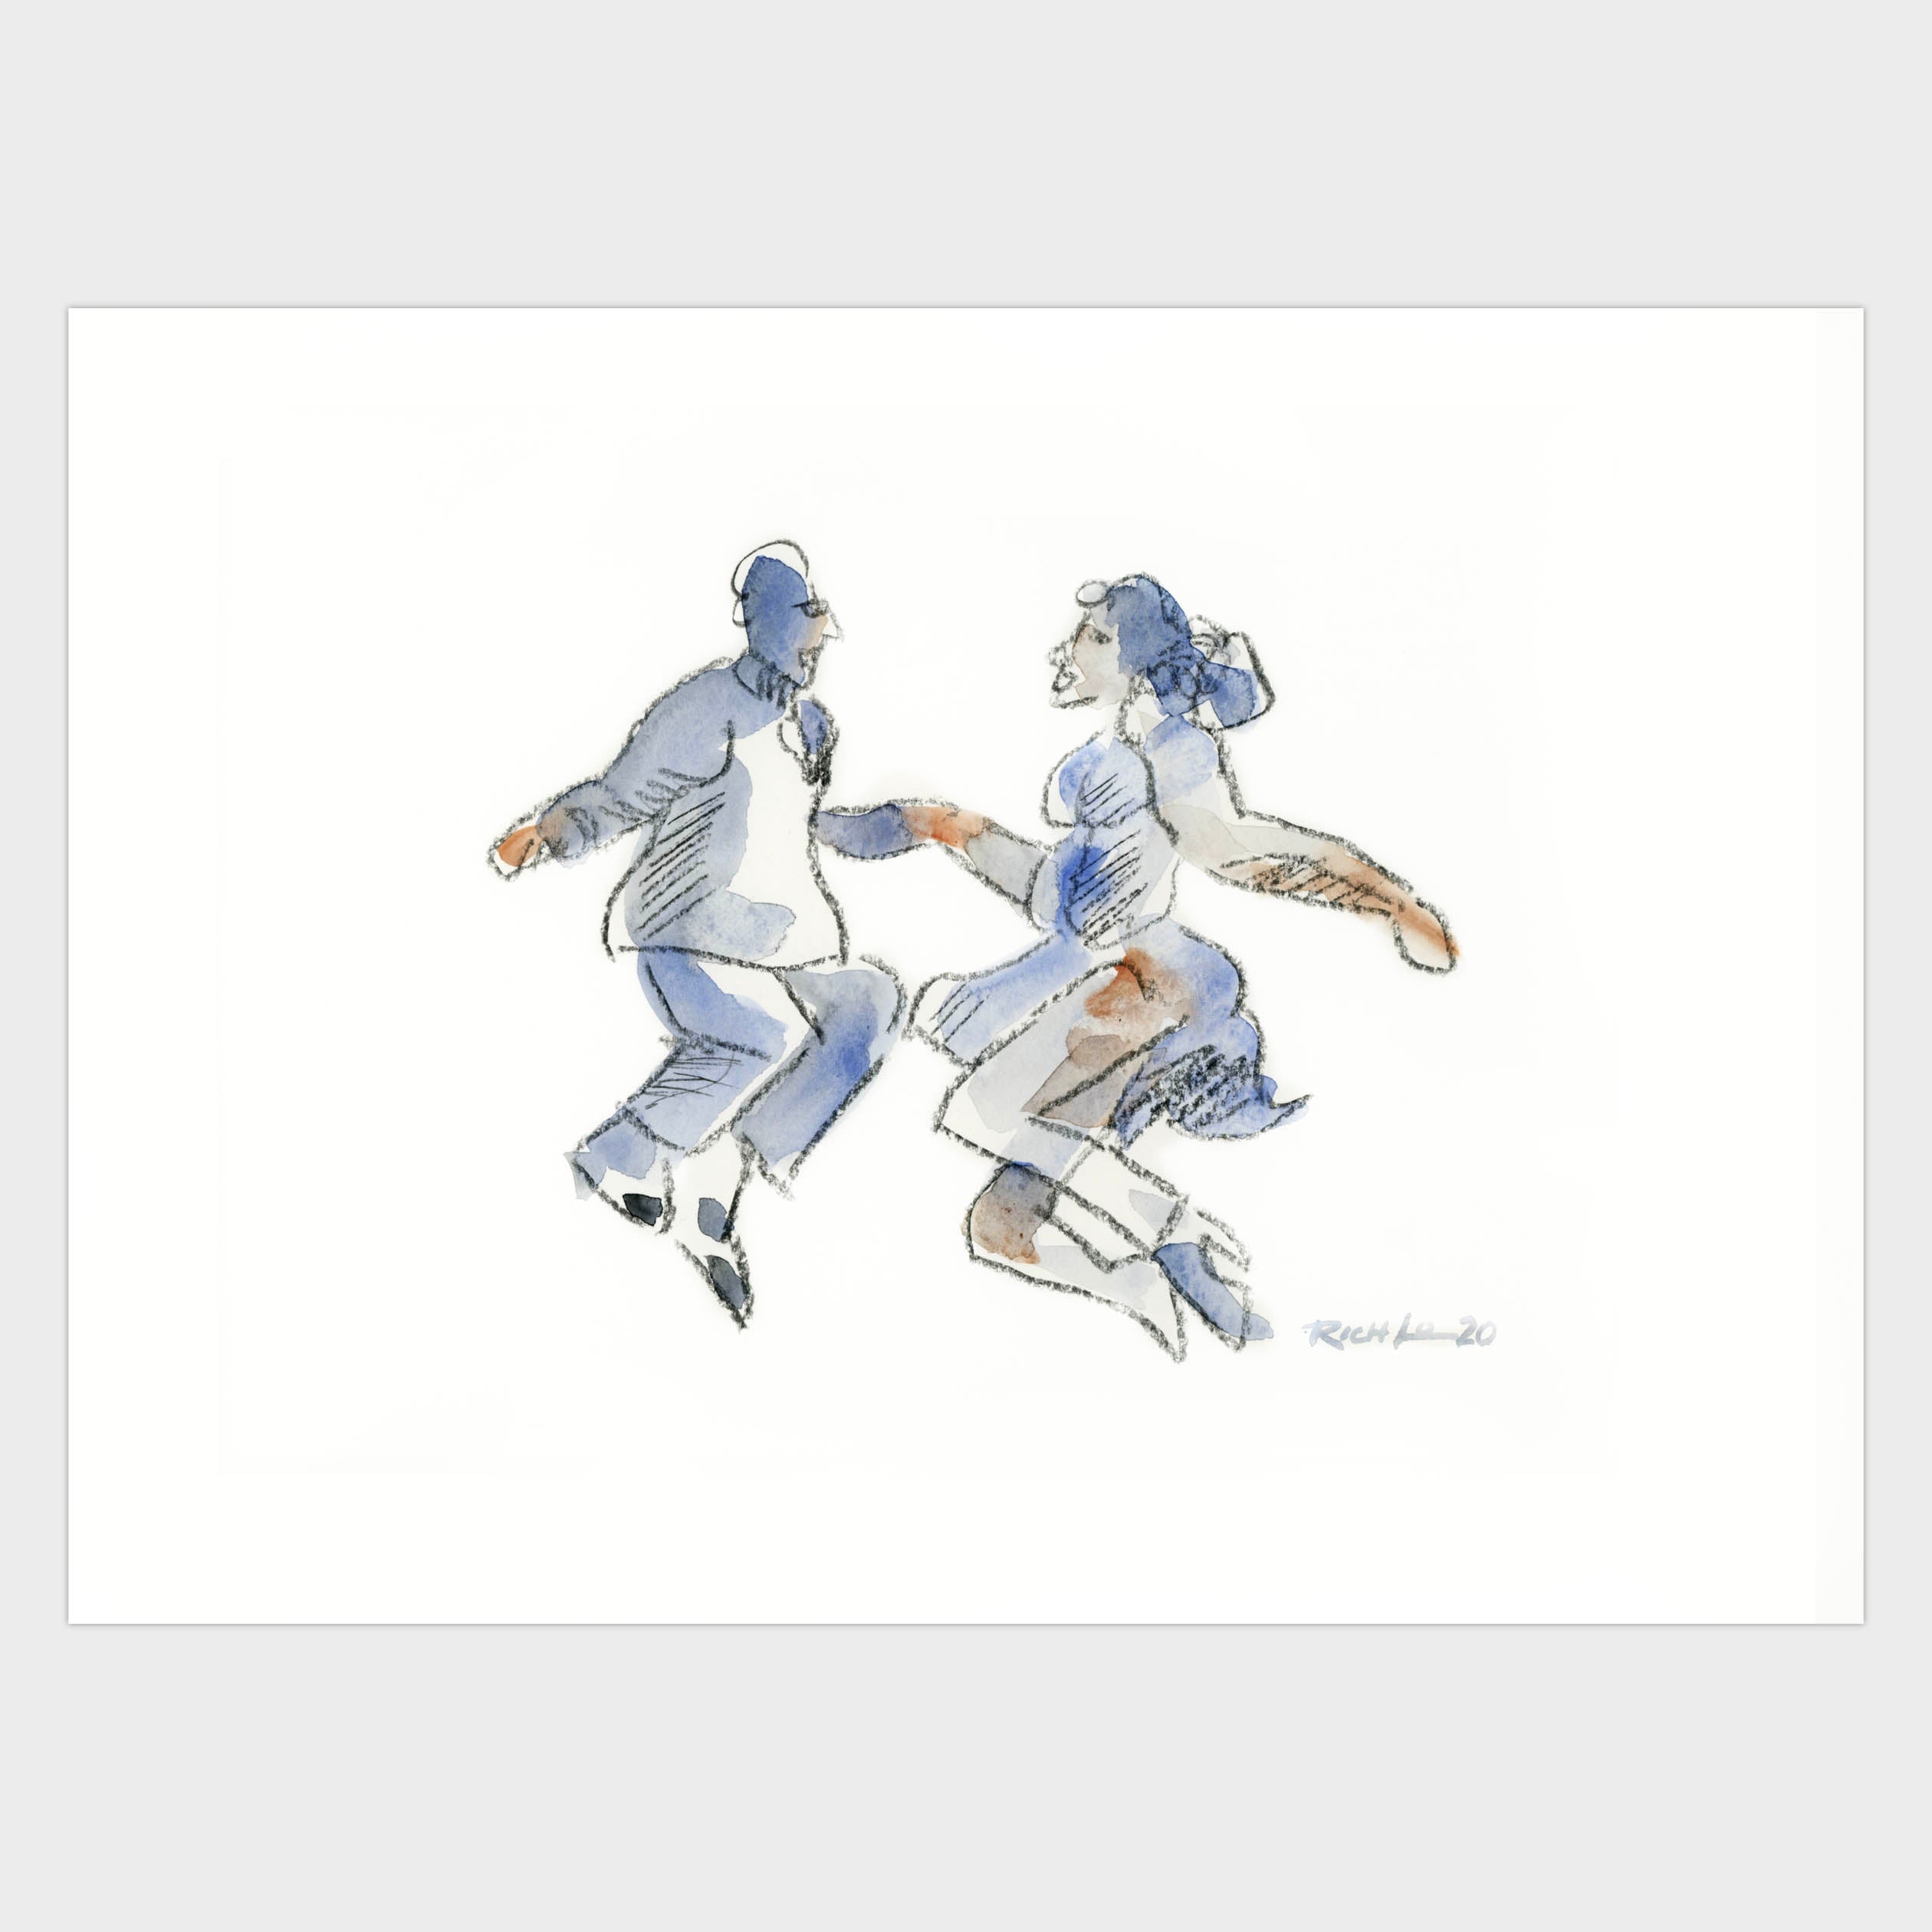 Original art. Playful line and washes of a couple dancing create a spirited composition.